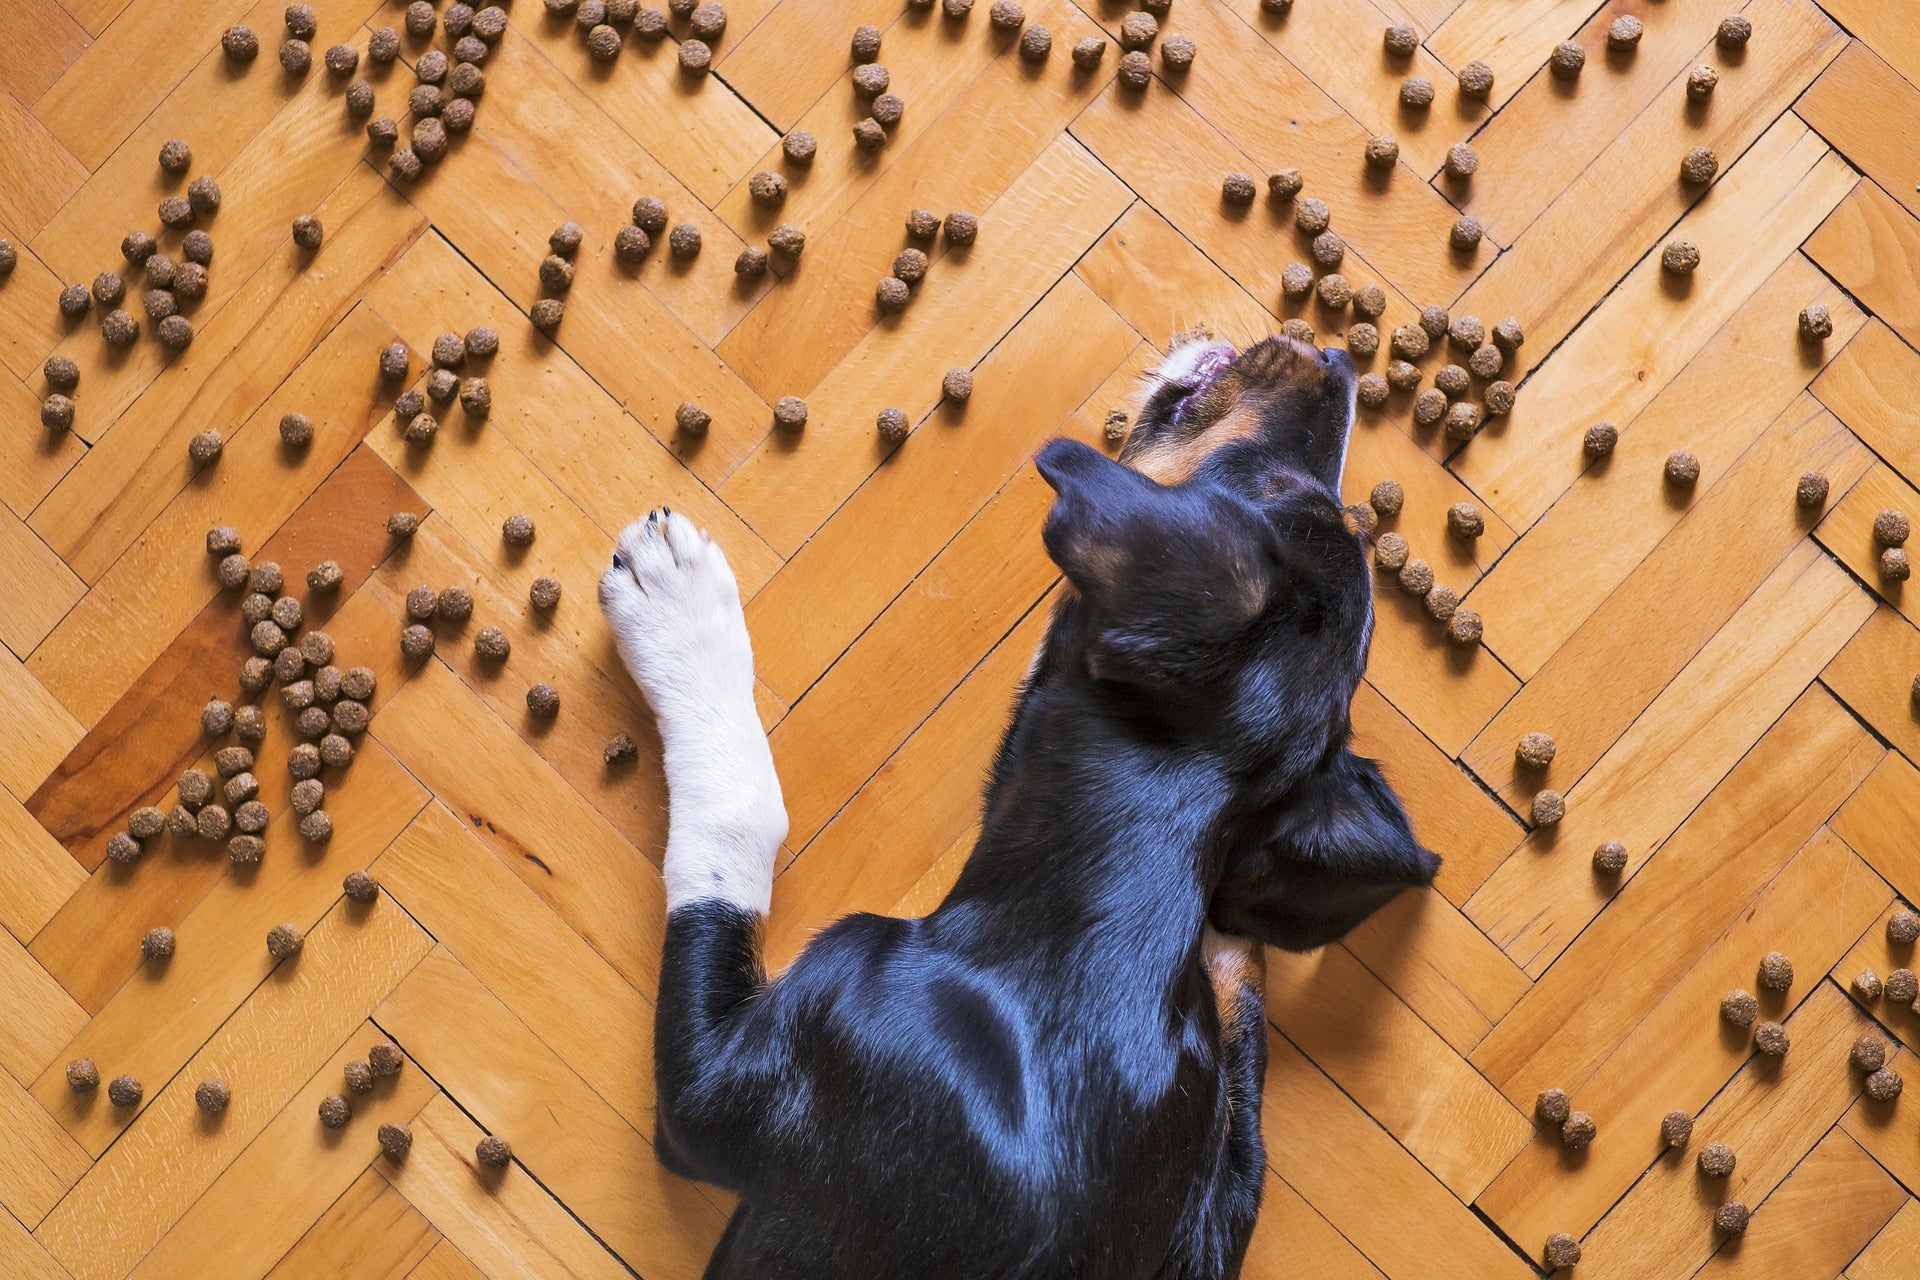 31 Dangerous Foods Dogs Can't Eat - Your Dog Advisor